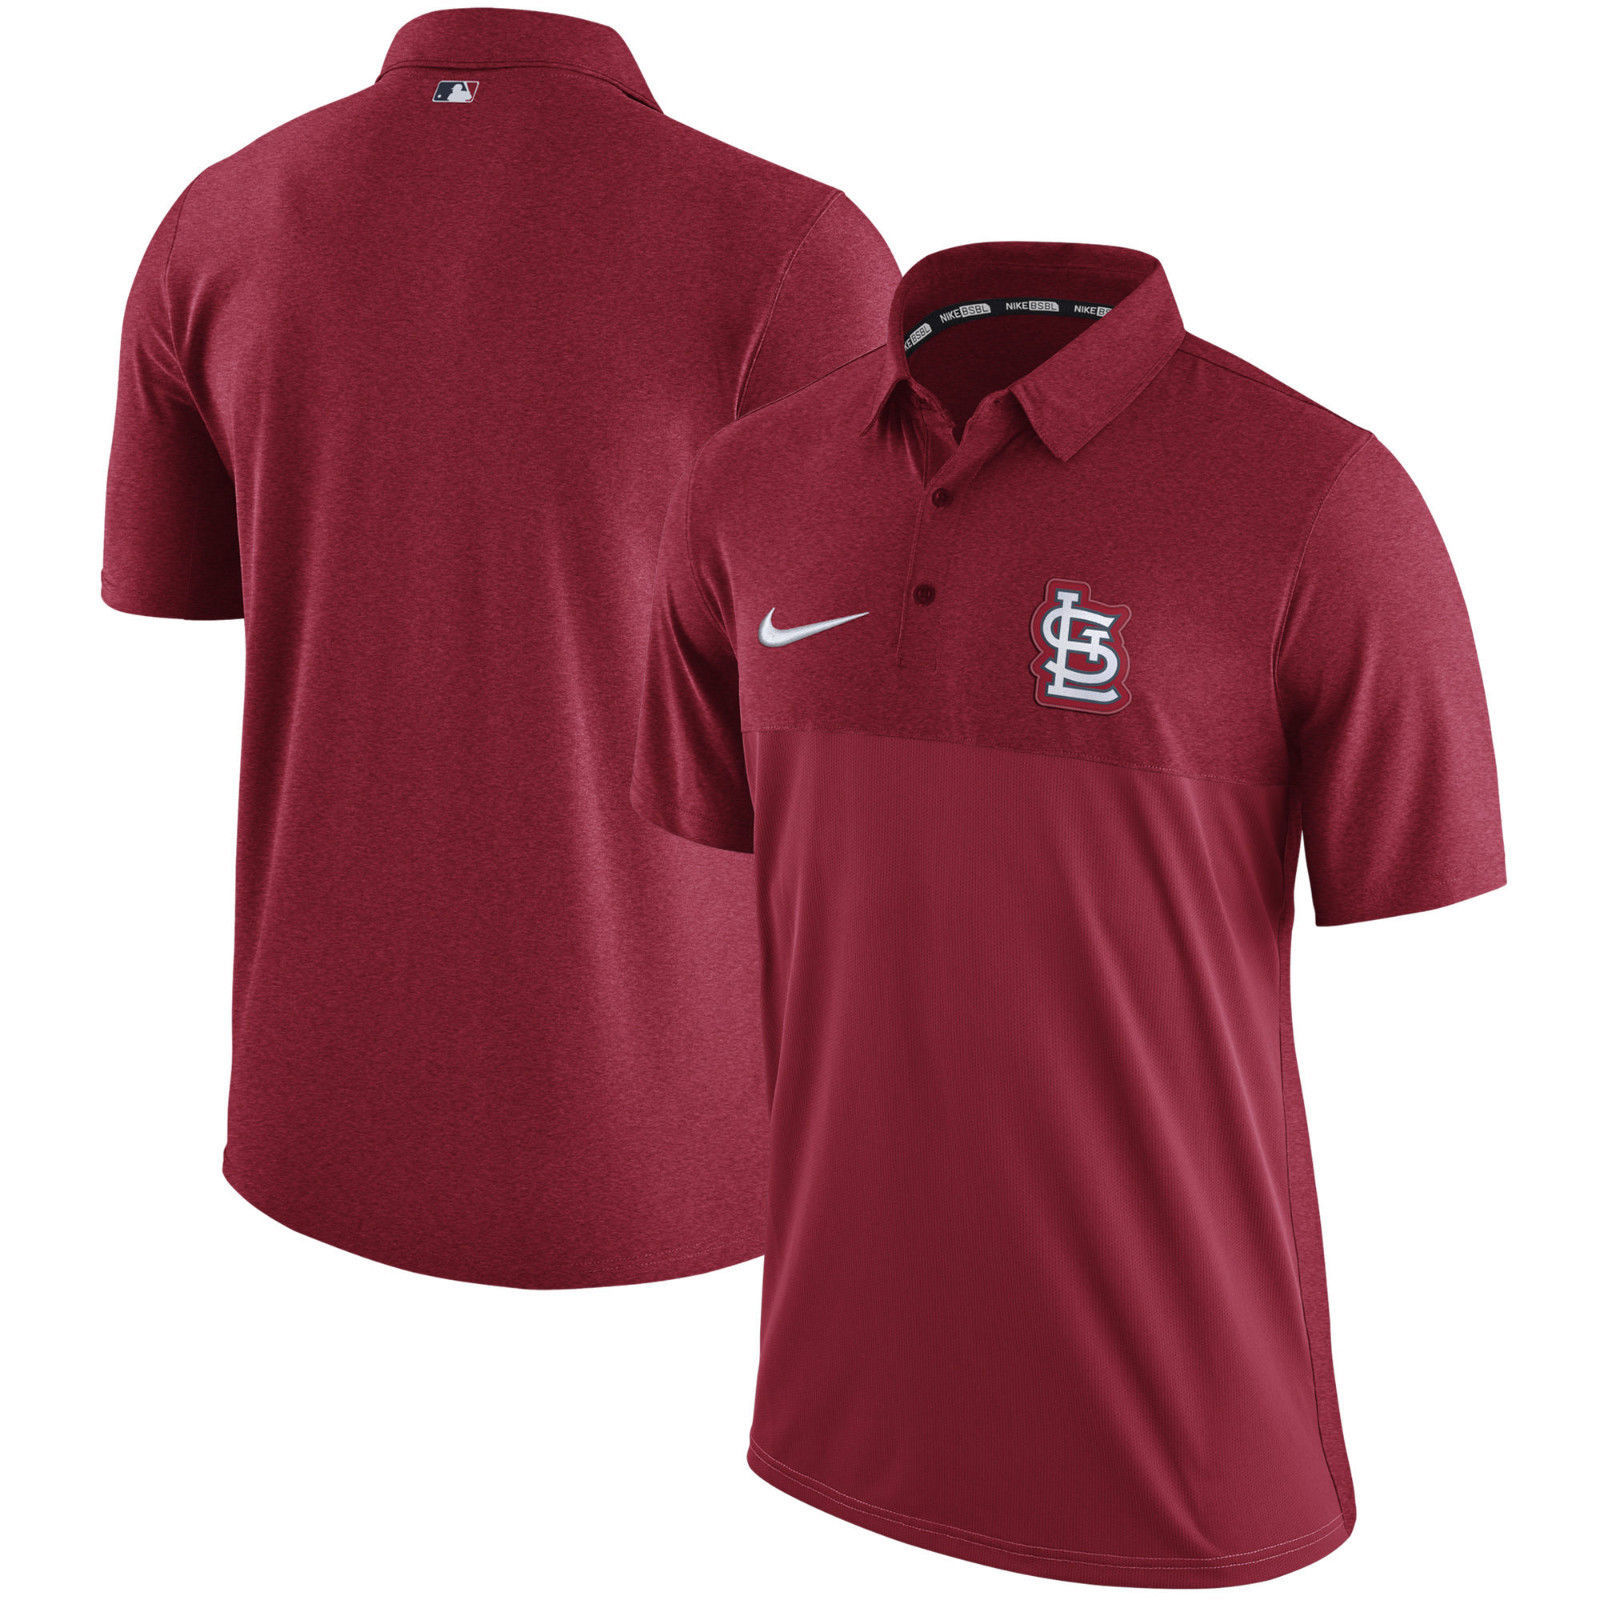 ST. LOUIS CARDINALS POLO SHIRT- NIKE DRI-FIT-MLB-RED-ADULT SIZES-NWT-$75 RETAIL - $42.99